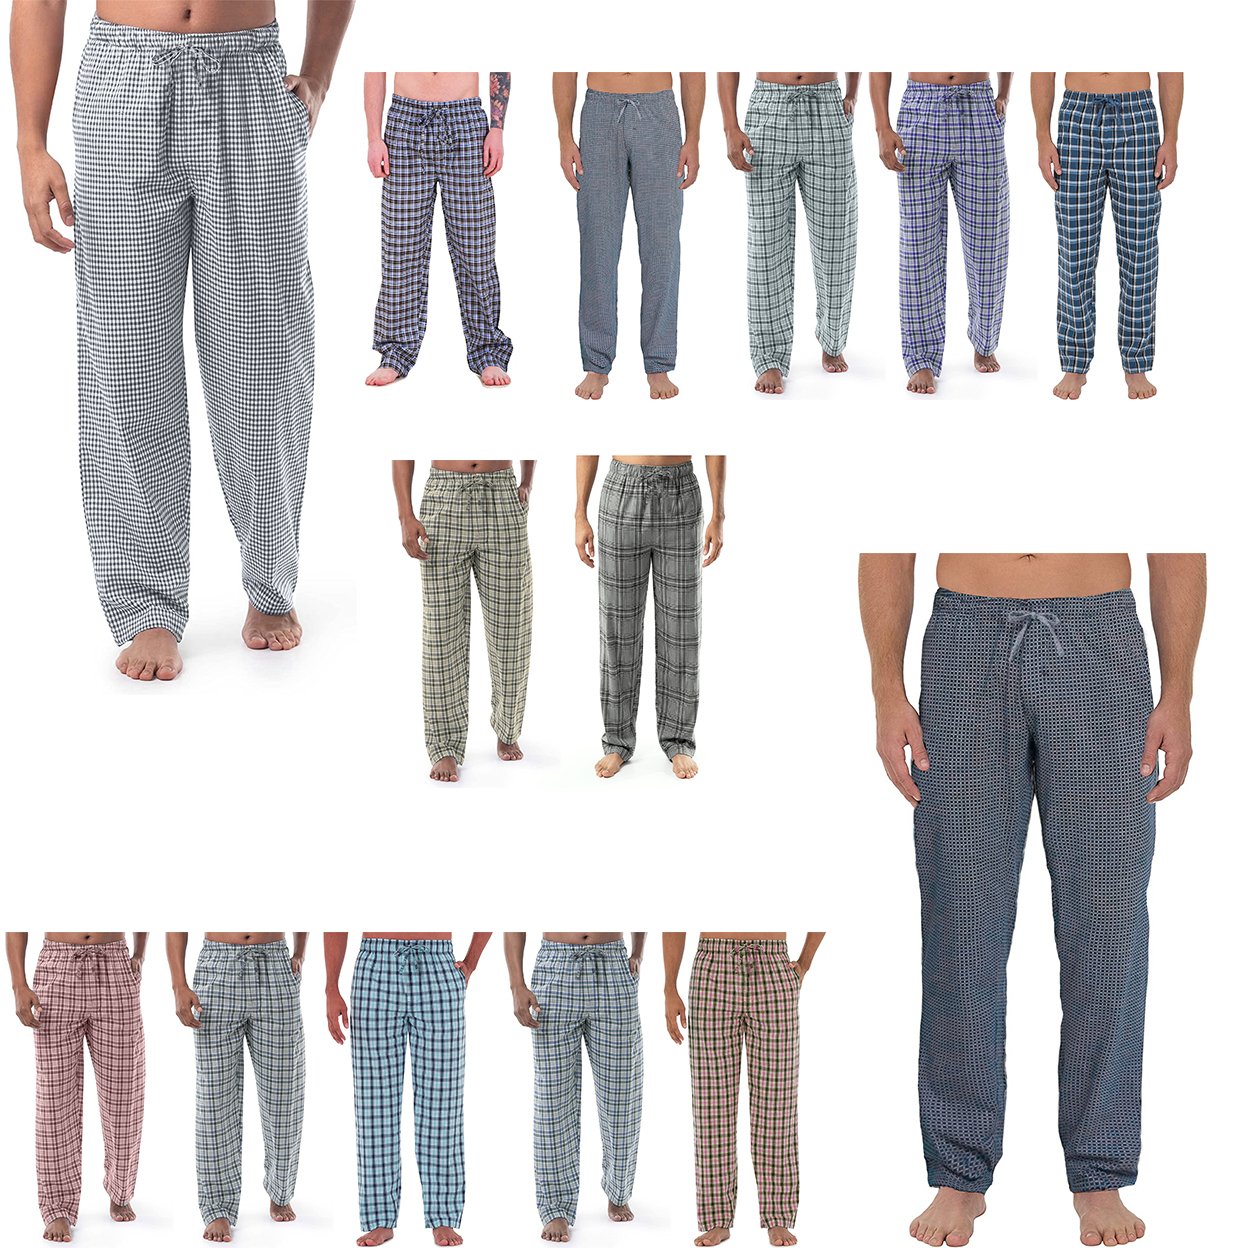 3-Pack: Men's Soft Jersey Knit Long Lounge Sleep Pants With Pockets - Plaid, 2X-Large